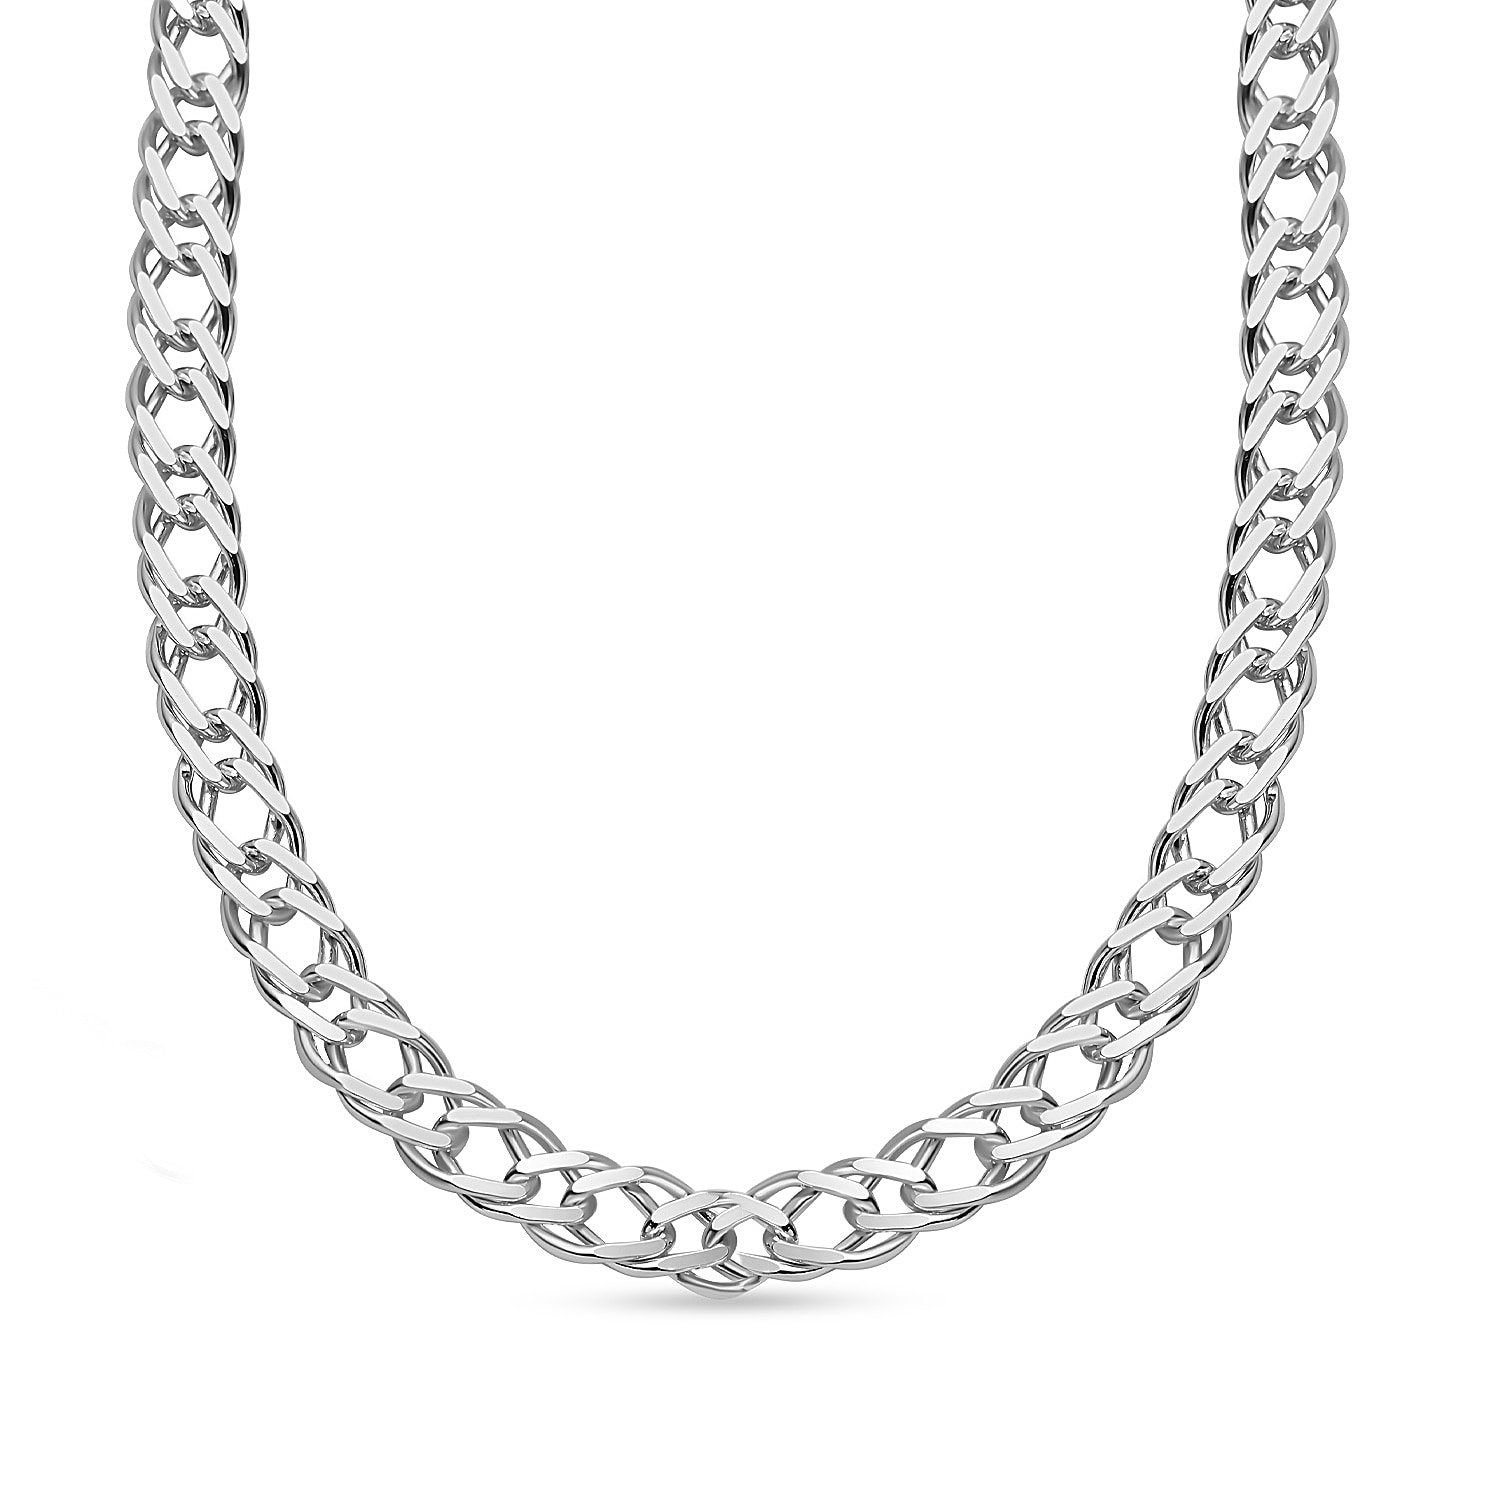 JCK Vegas Preview Deal - Double Curb Necklace in Sterling Silver (Size - 22), Silver Wt. 22.7 Gms